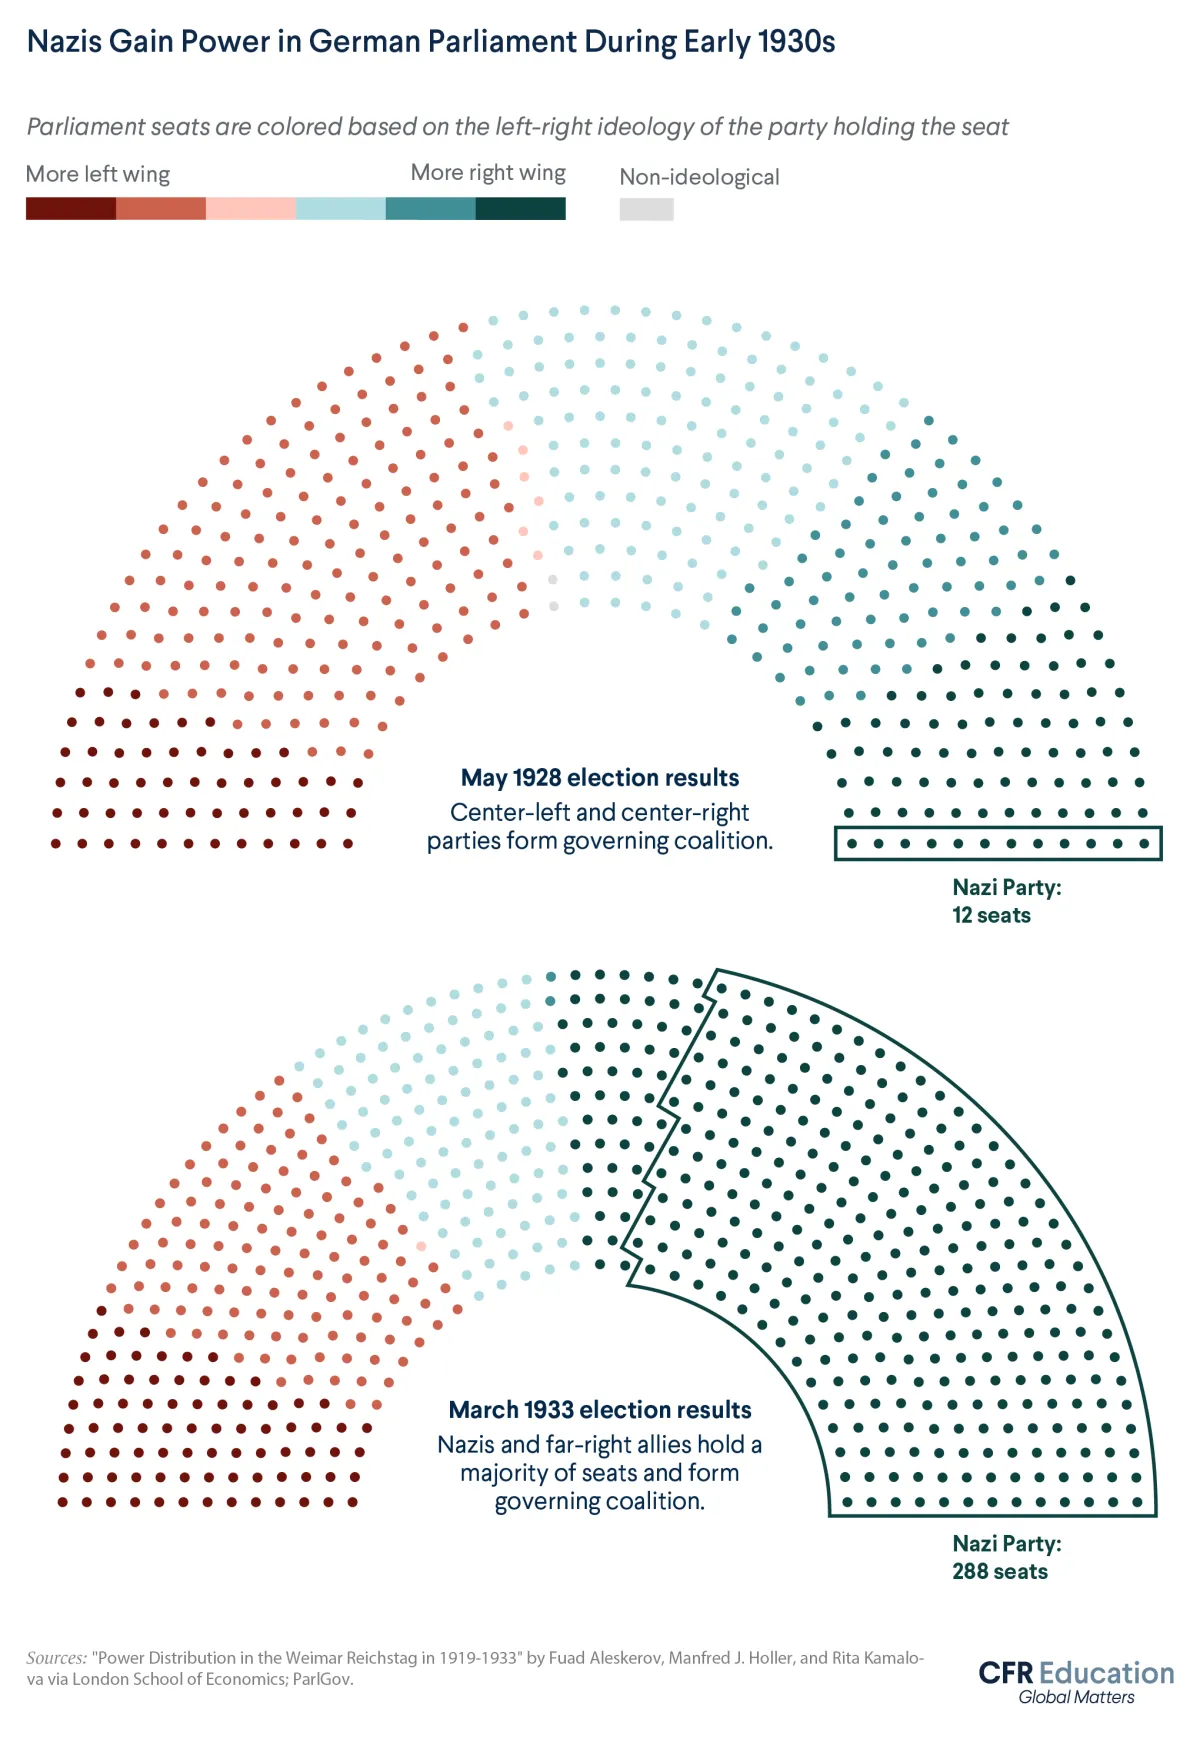 Graphic showing how Nazis gained power in the German Parliament through elections in the early 1930s. For more info contact us at cfr_education@cfr.org.